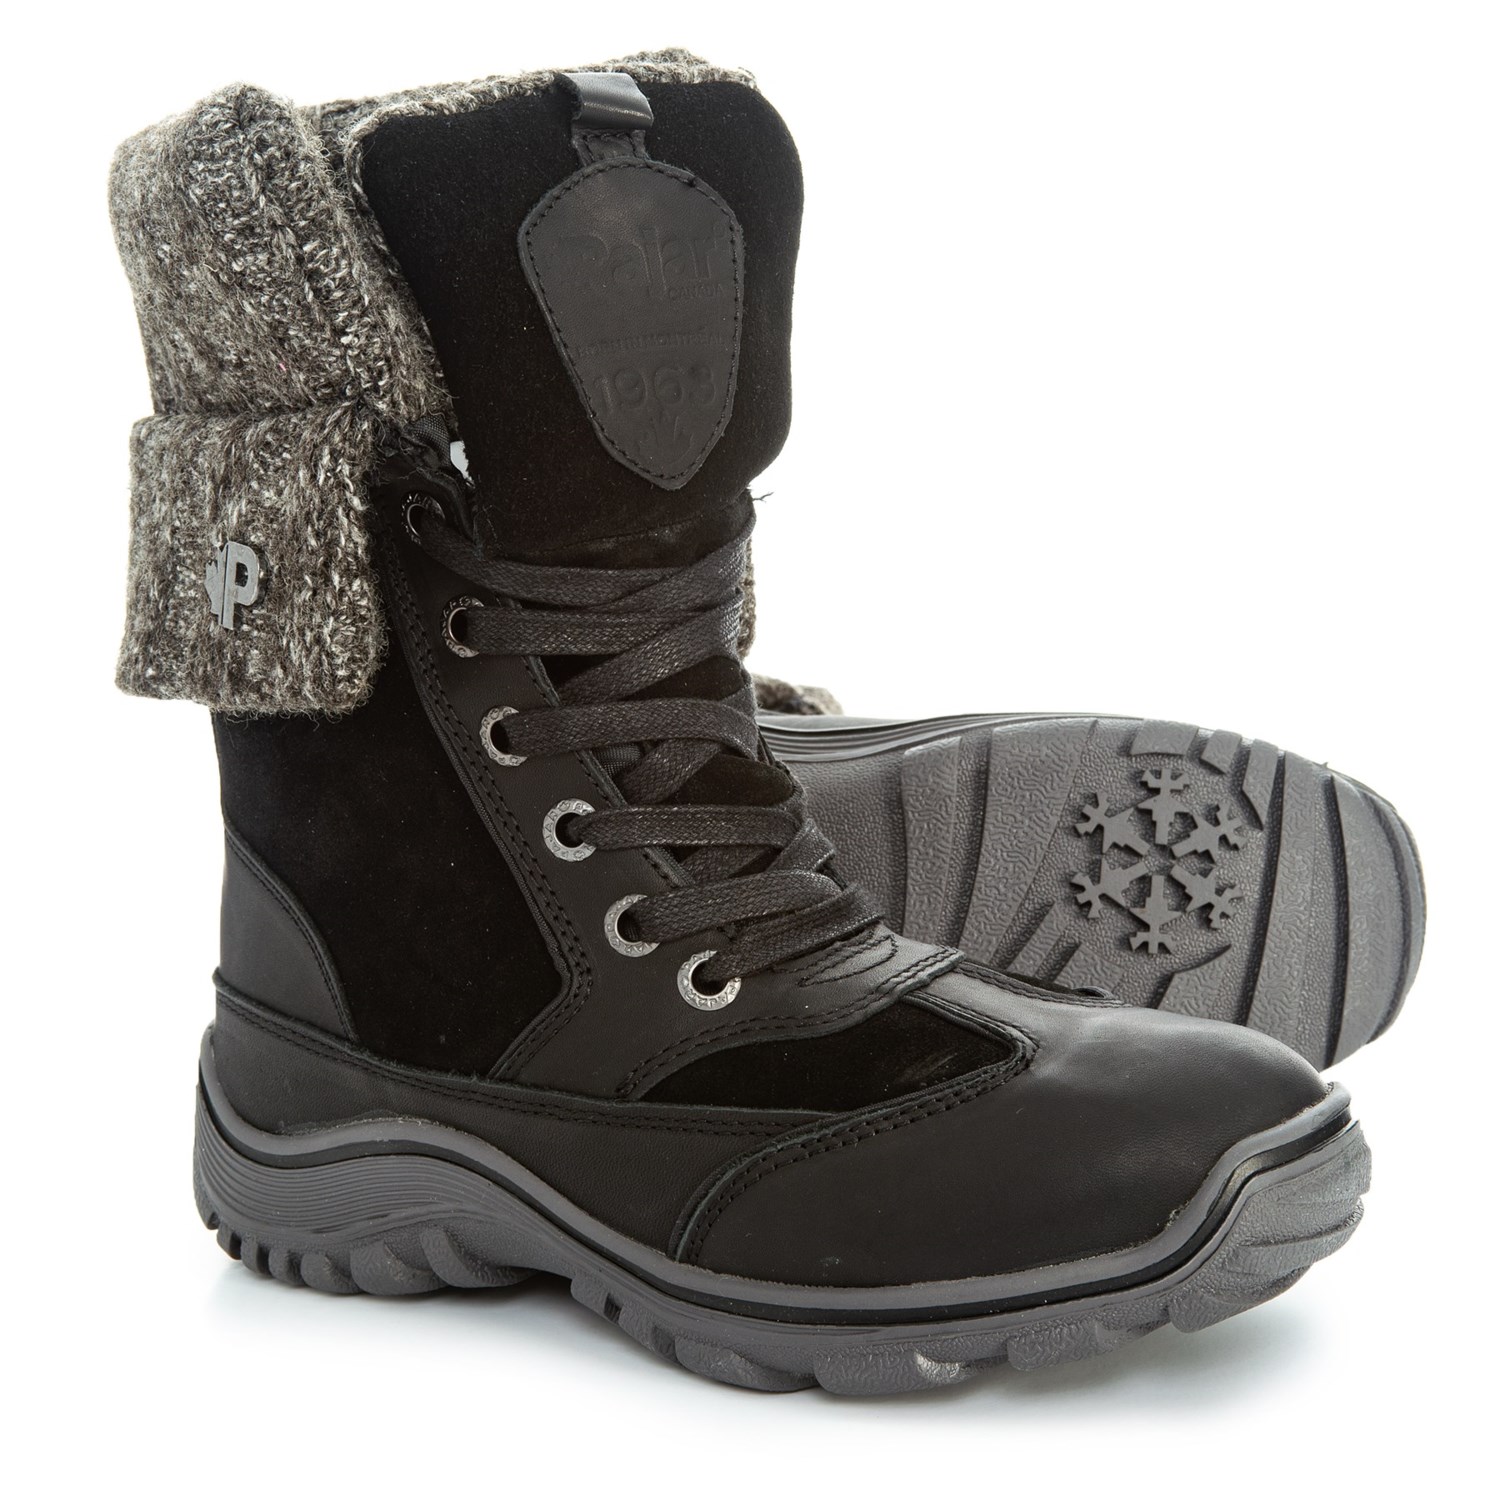 pajar waterproof insulated boots